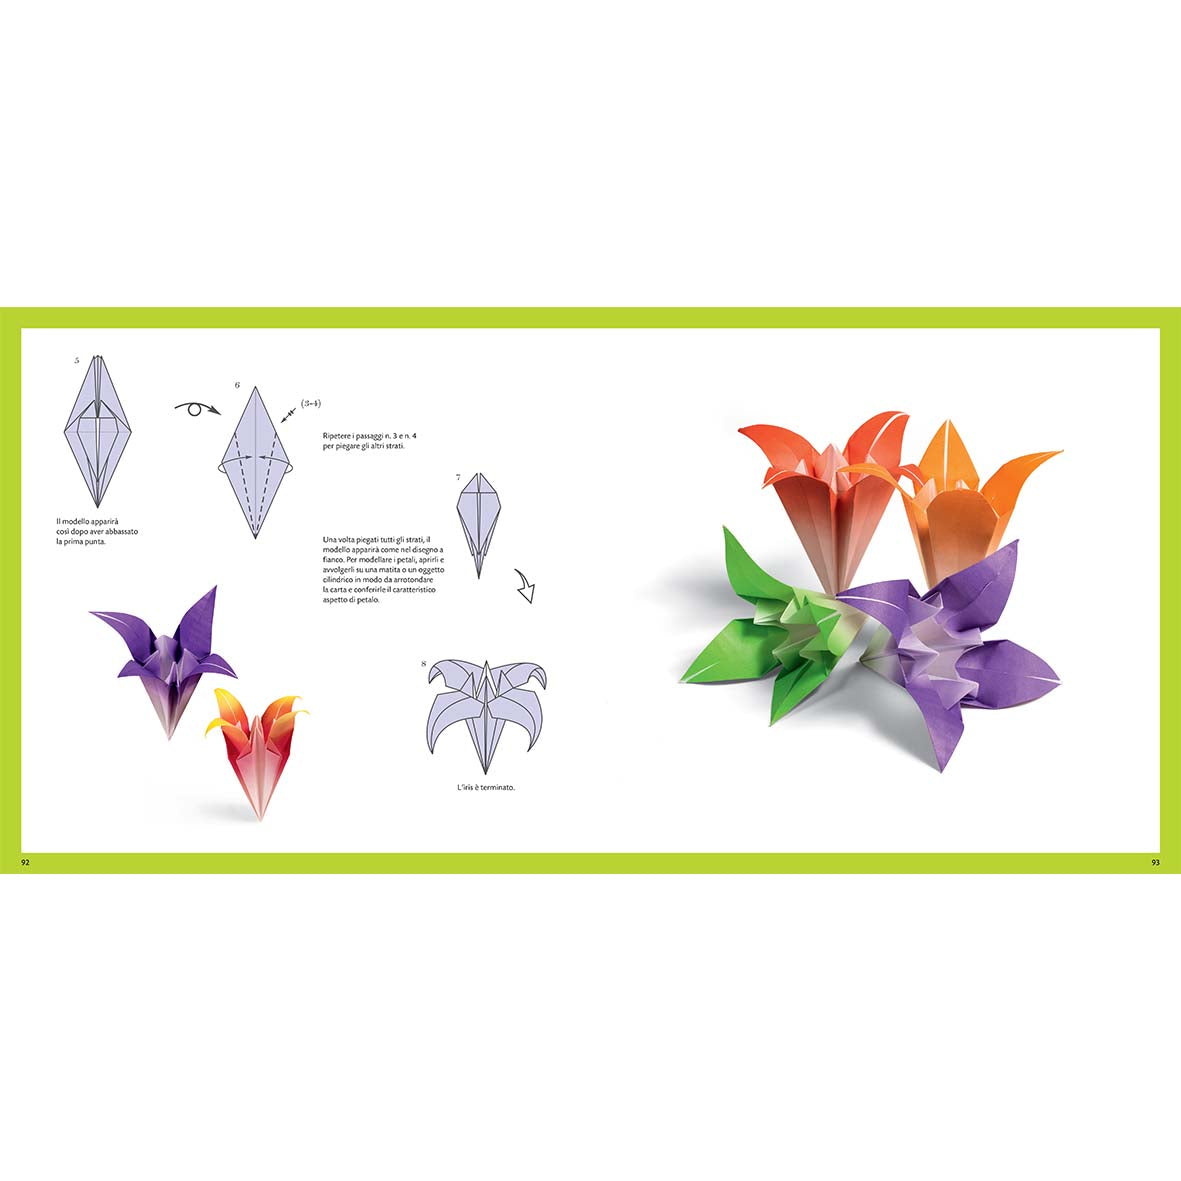 Origami lessons - the book to become an origami artist